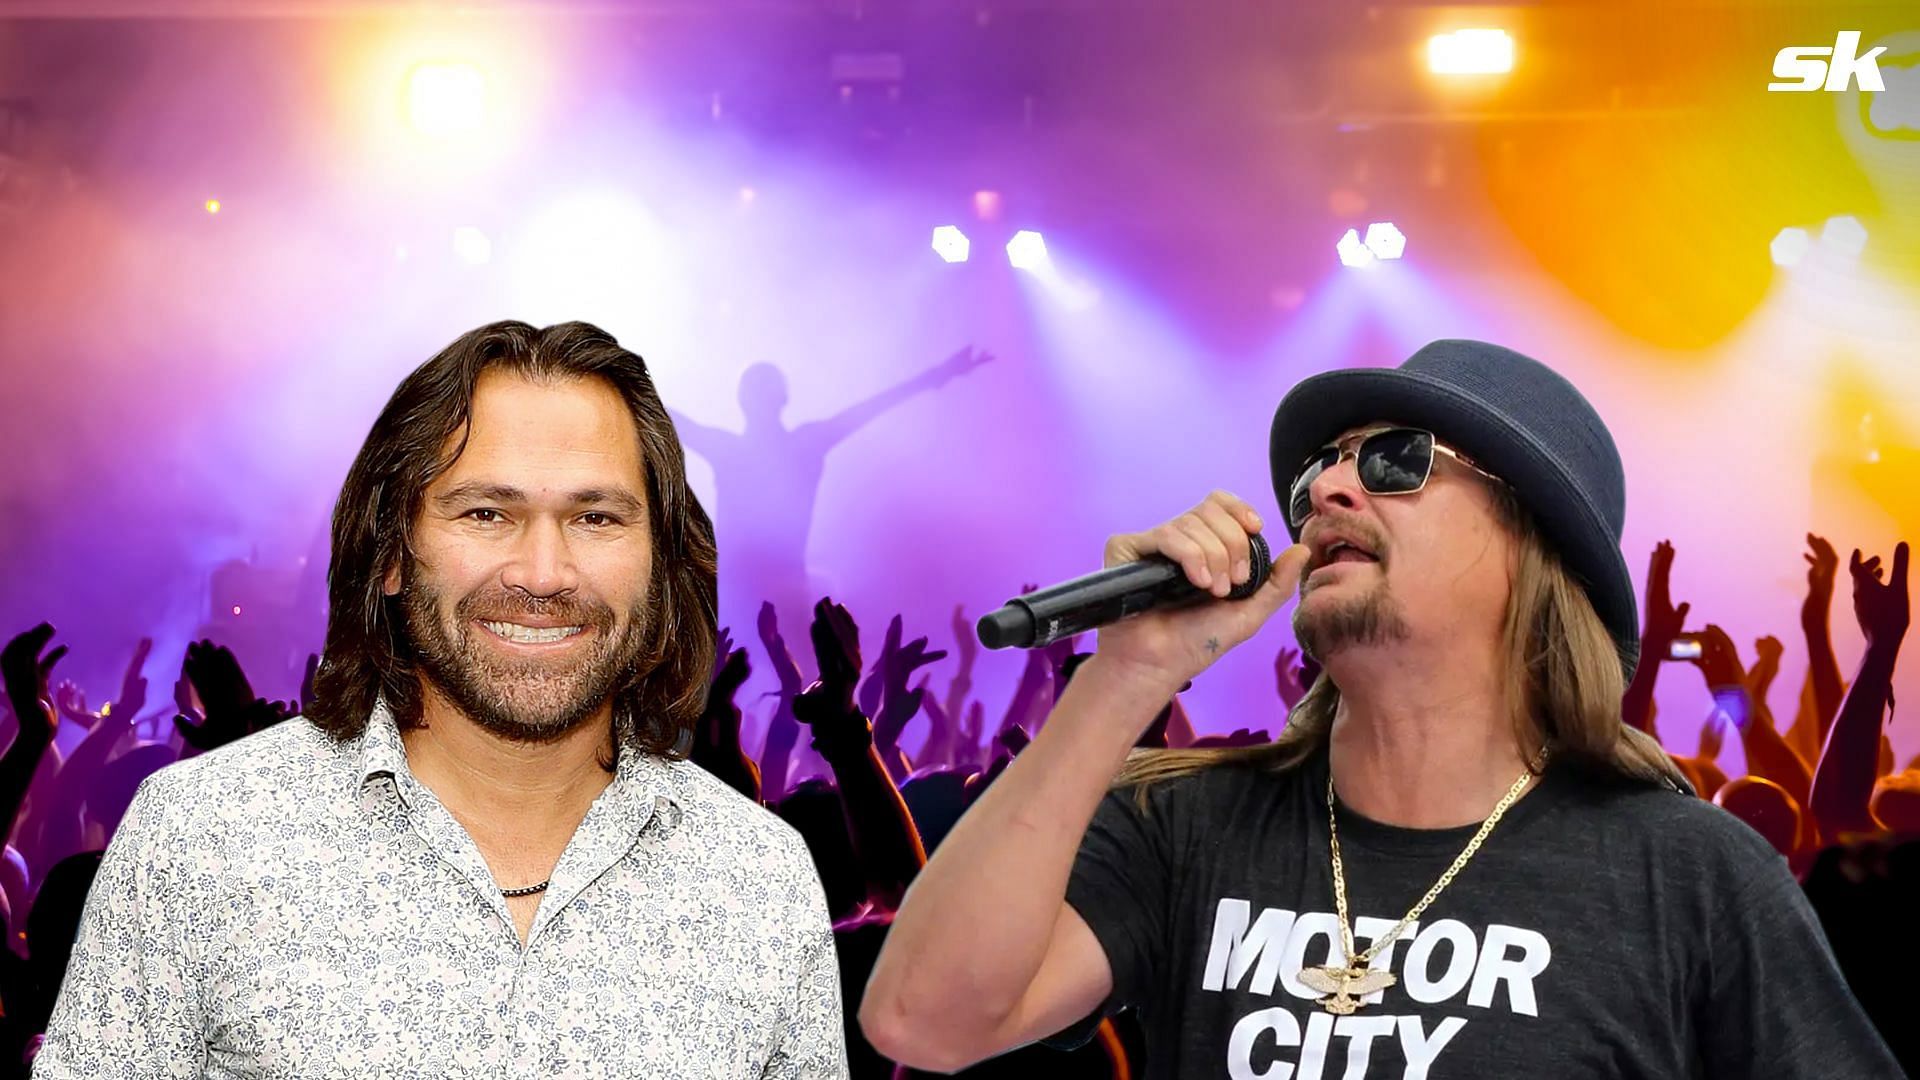 Baseball glory meets rock royalty as former World Series champ Johnny Damon and rapper Kid Rock unite in a snapshot